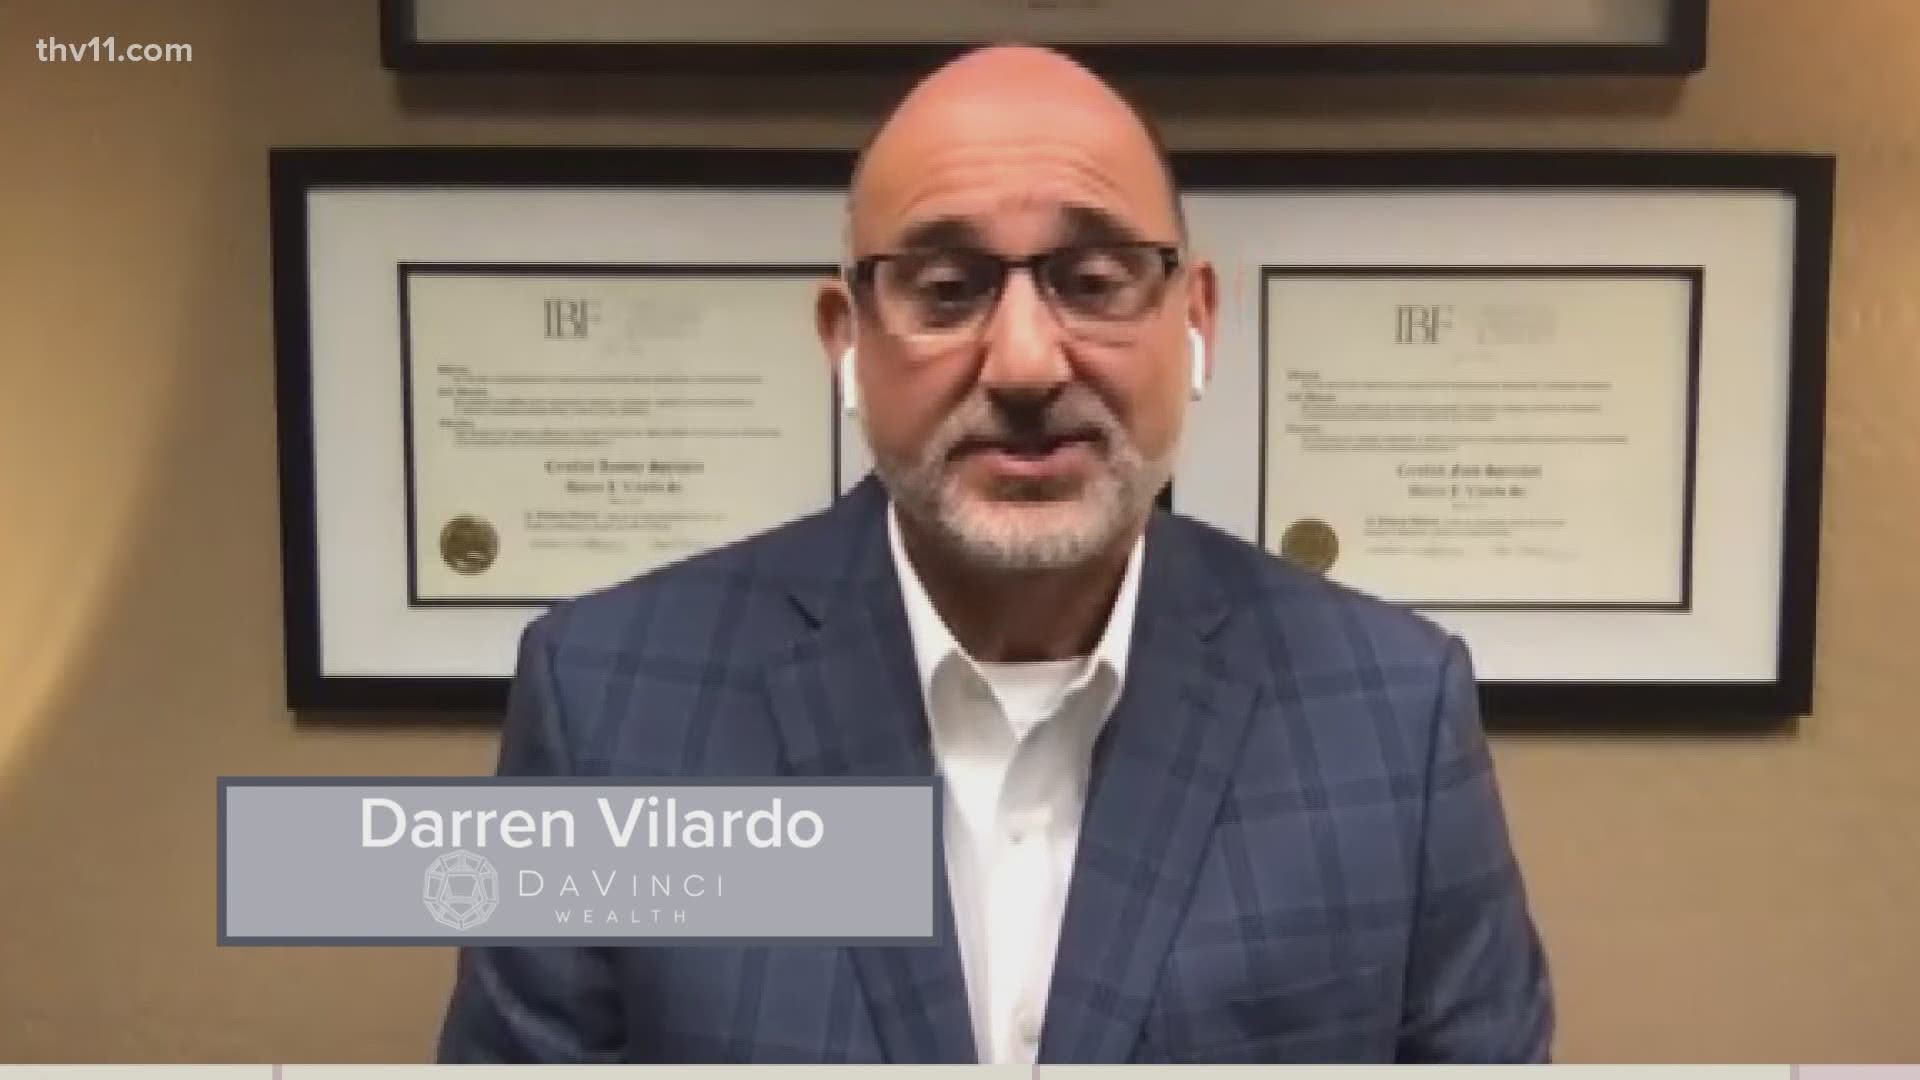 Founder of Davinci Wealth Darren Vilardo says preparing for a successful retirement is key and recommends turning to a professional for financial planning.